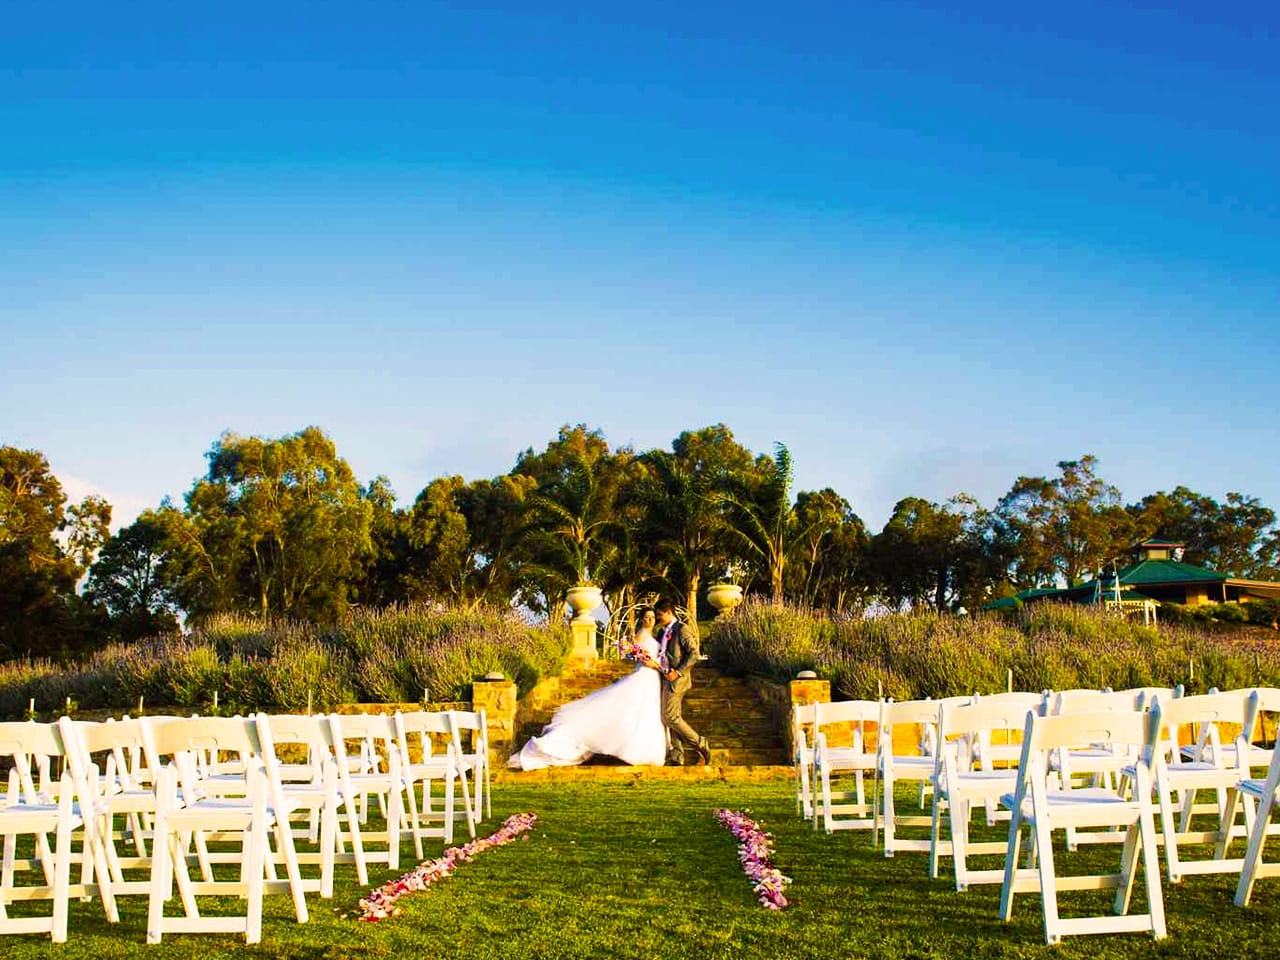 Bride And Groom Taking Photo With White Chairs In Front Of Them